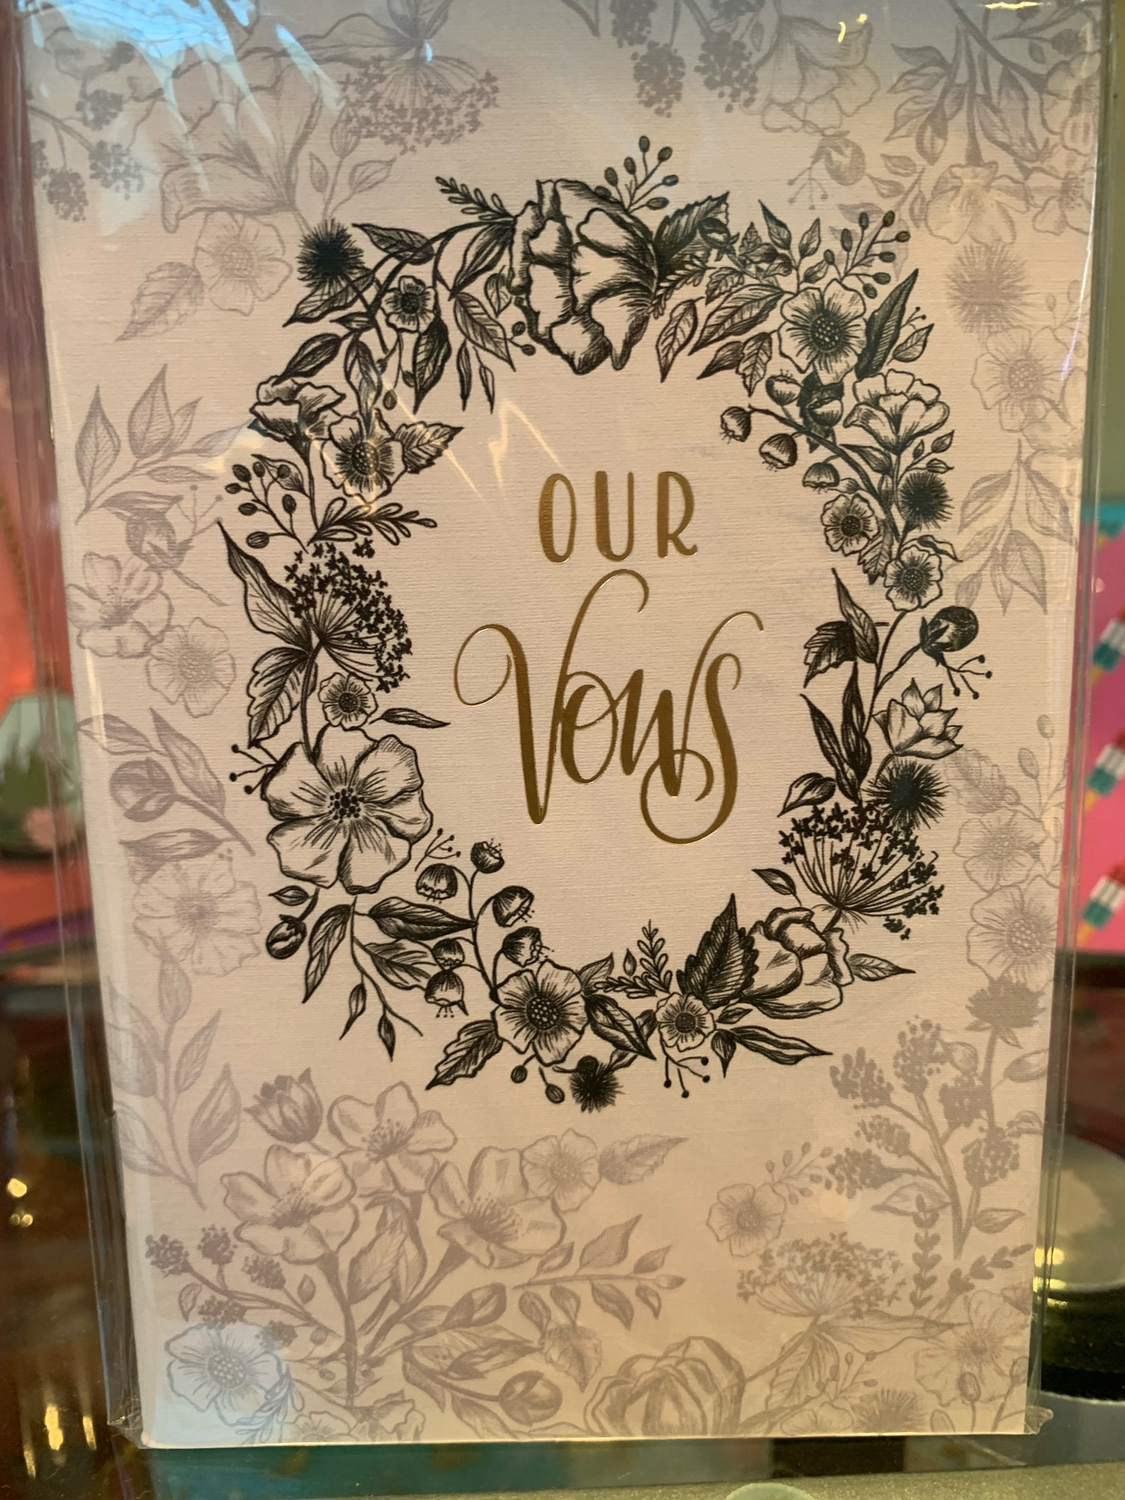 Our Vows! 2pack Notebook